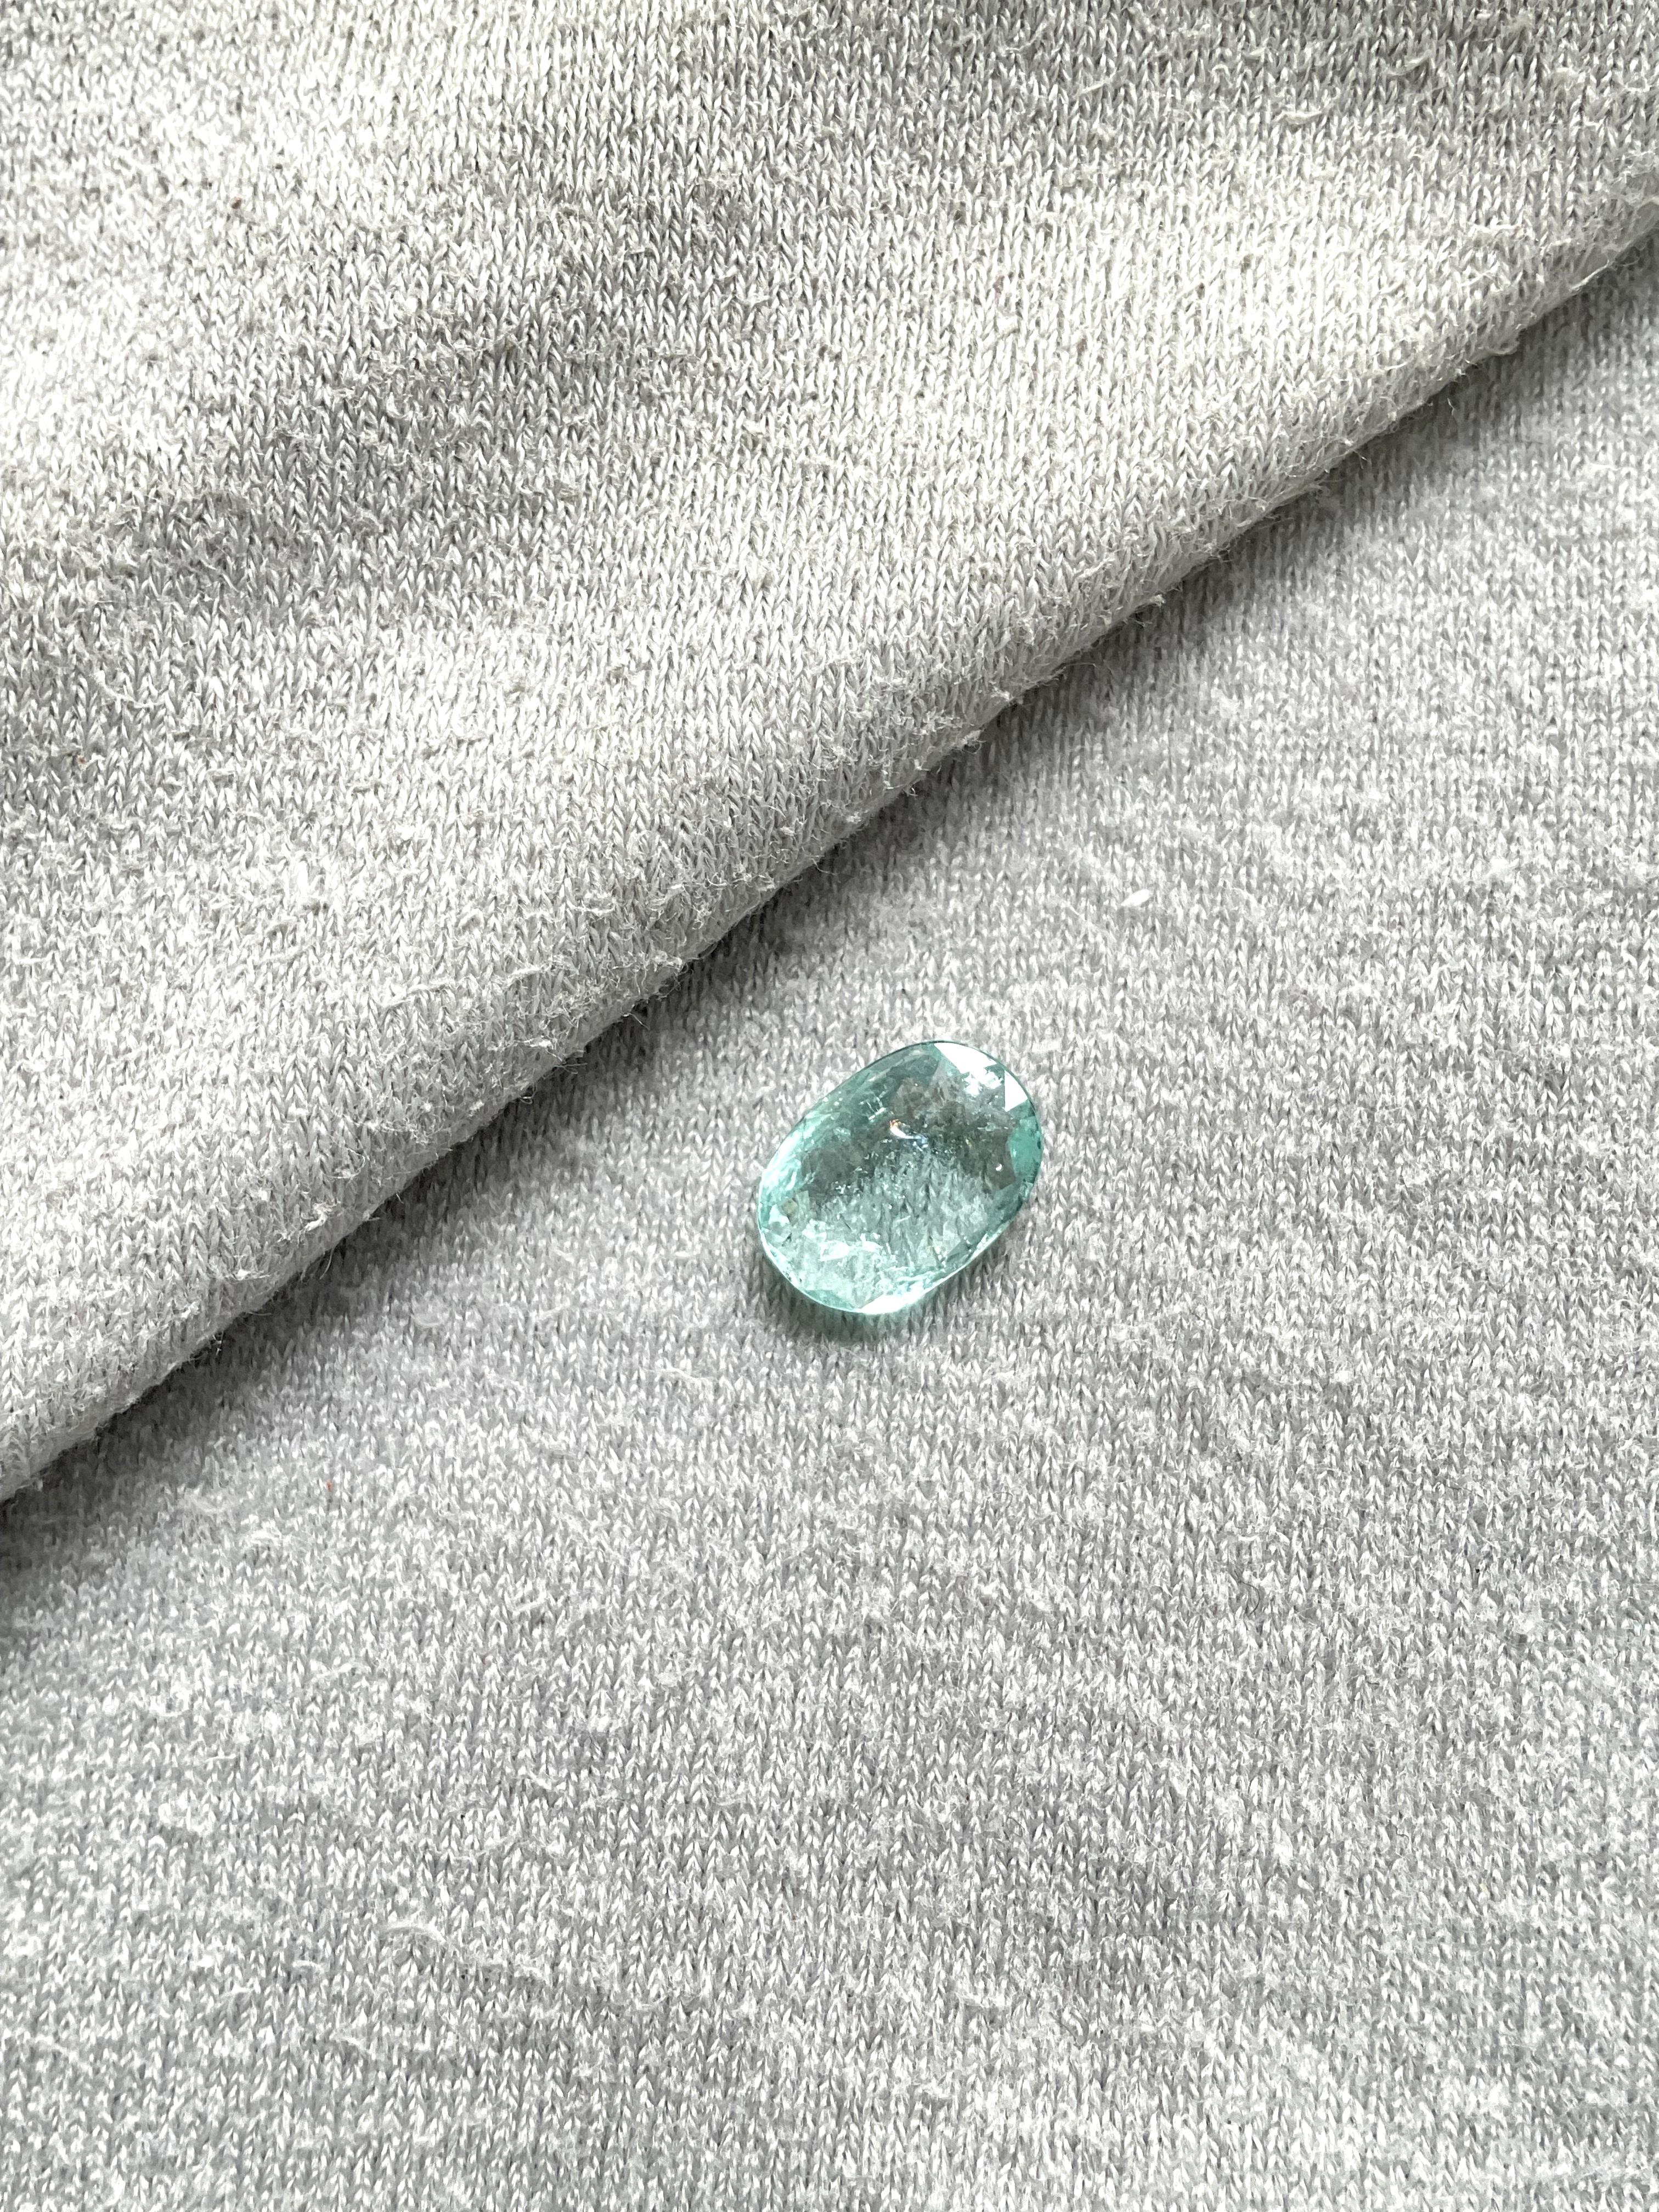 Art Deco Certified 1.75 Carats Green Paraiba Tourmaline Oval Cut Stone for Fine Jewelry For Sale